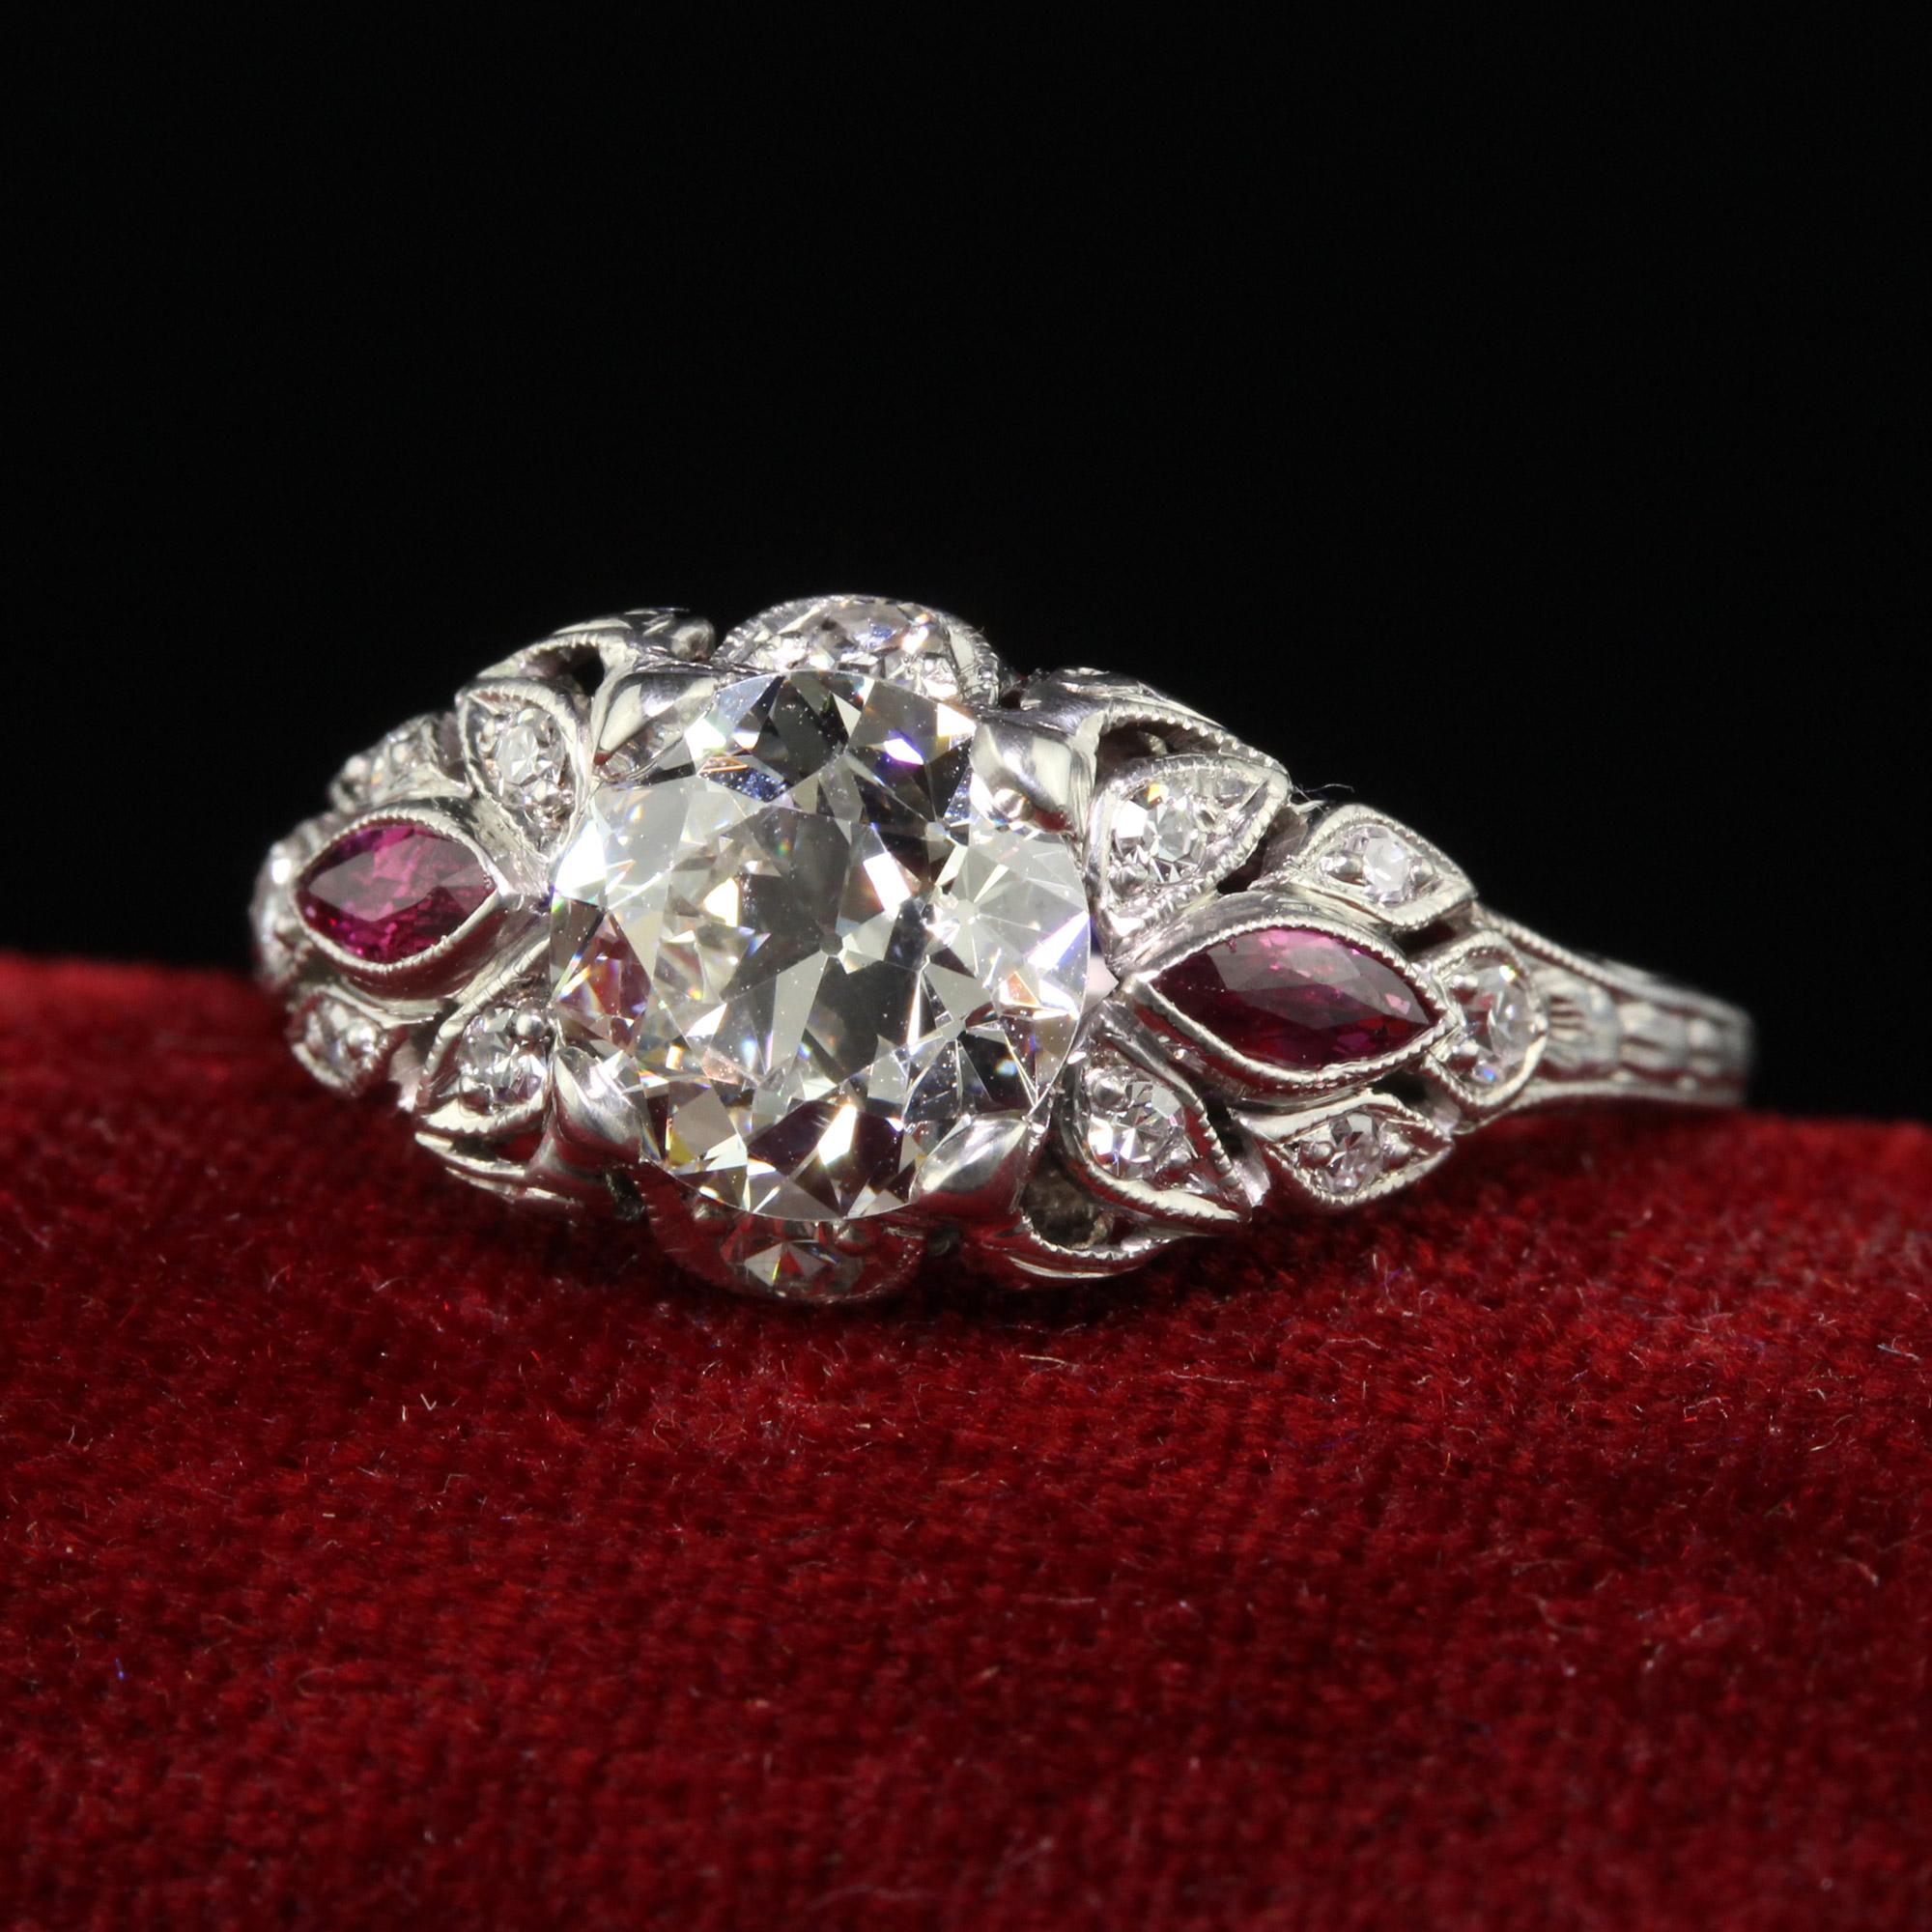 Beautiful Antique Art Deco Platinum Old European Diamond and Ruby Engagement Ring - GIA. This incredible engagement ring is crafted in platinum. The center holds an old cut diamond that has a GIA report. The diamond is set in one of the most